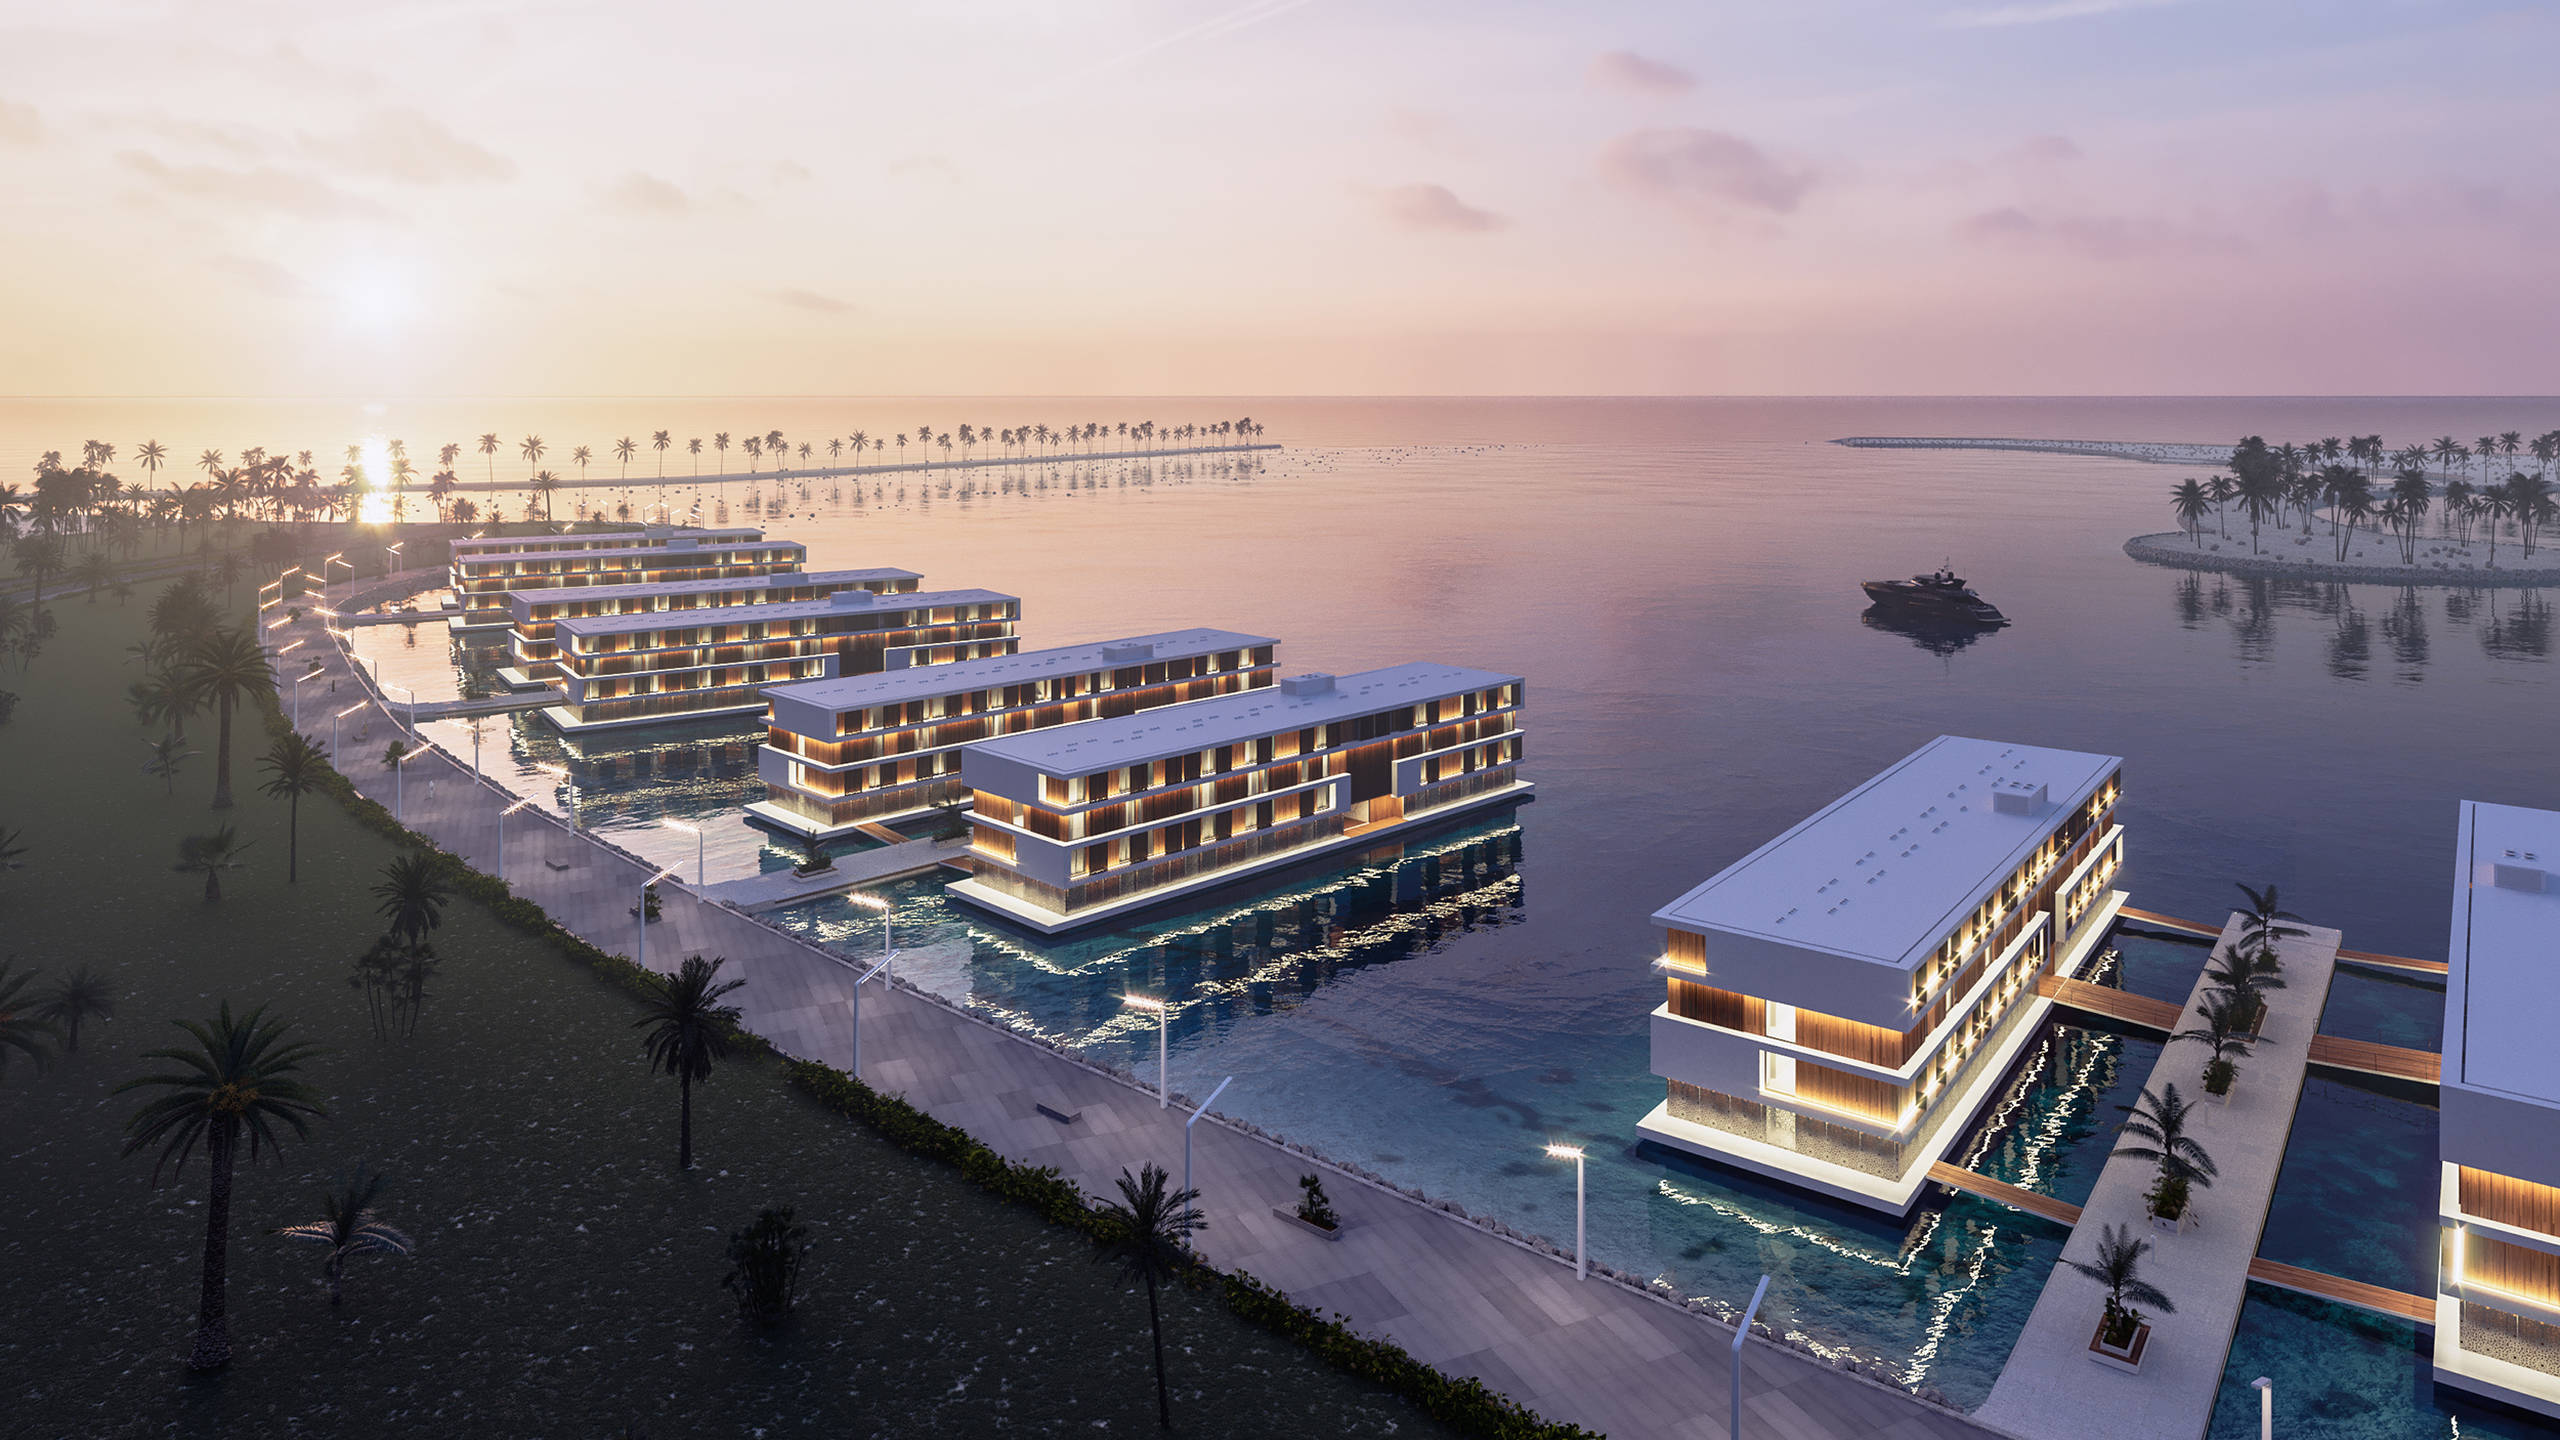 ADMARES to deliver 16 floating hotels to Qatar to serve tourists and fans for the FIFA World Cup 2022